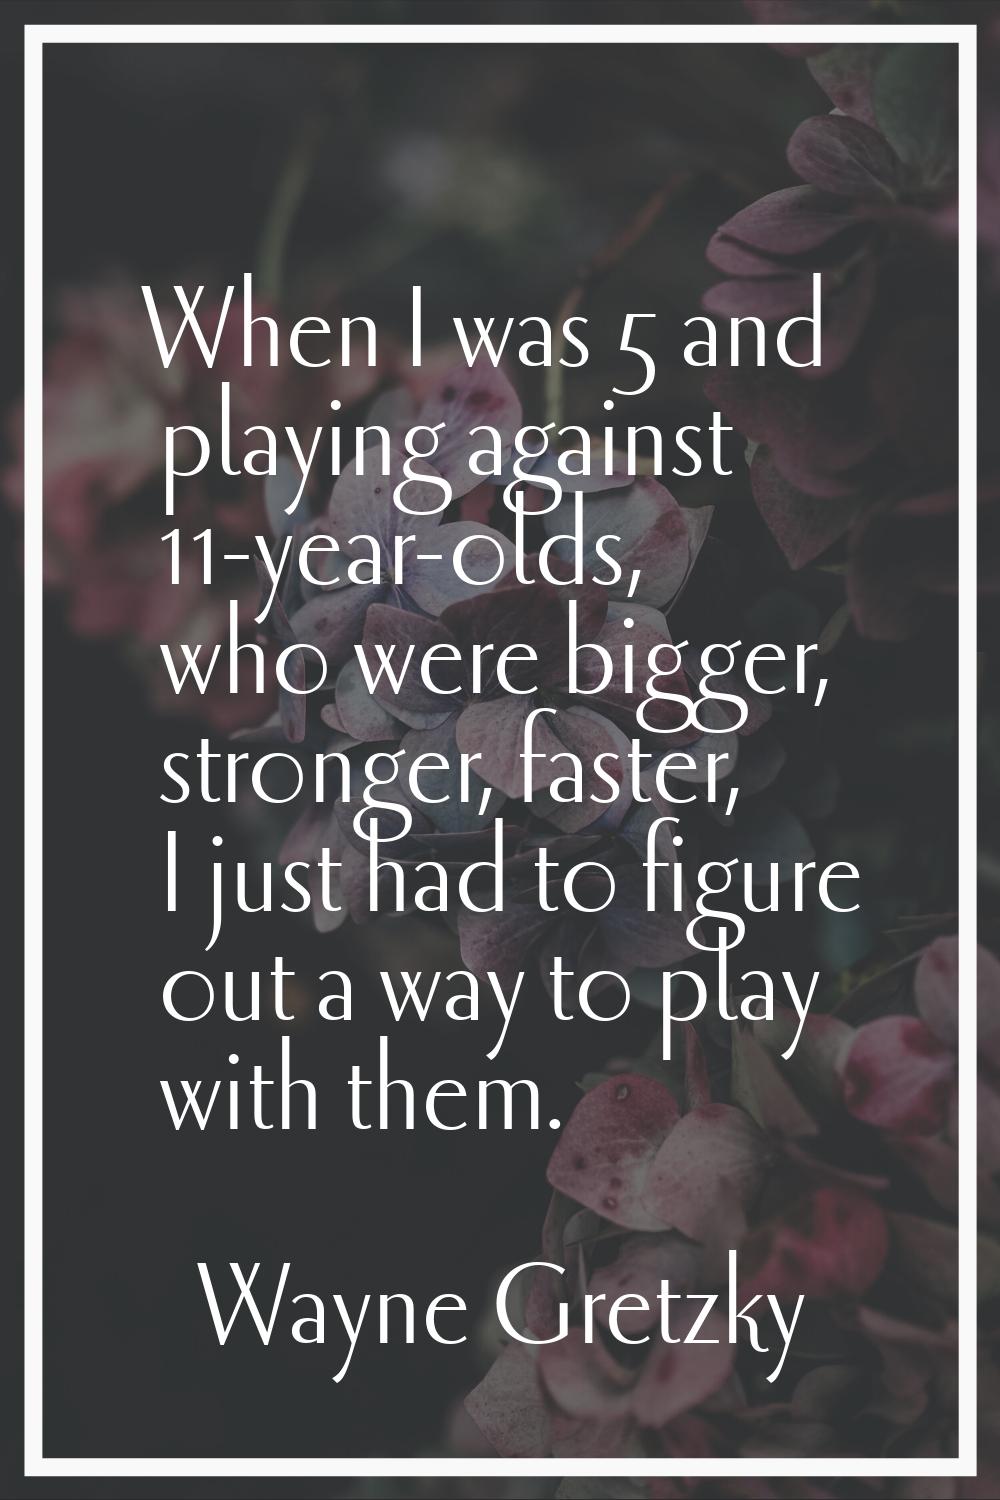 When I was 5 and playing against 11-year-olds, who were bigger, stronger, faster, I just had to fig